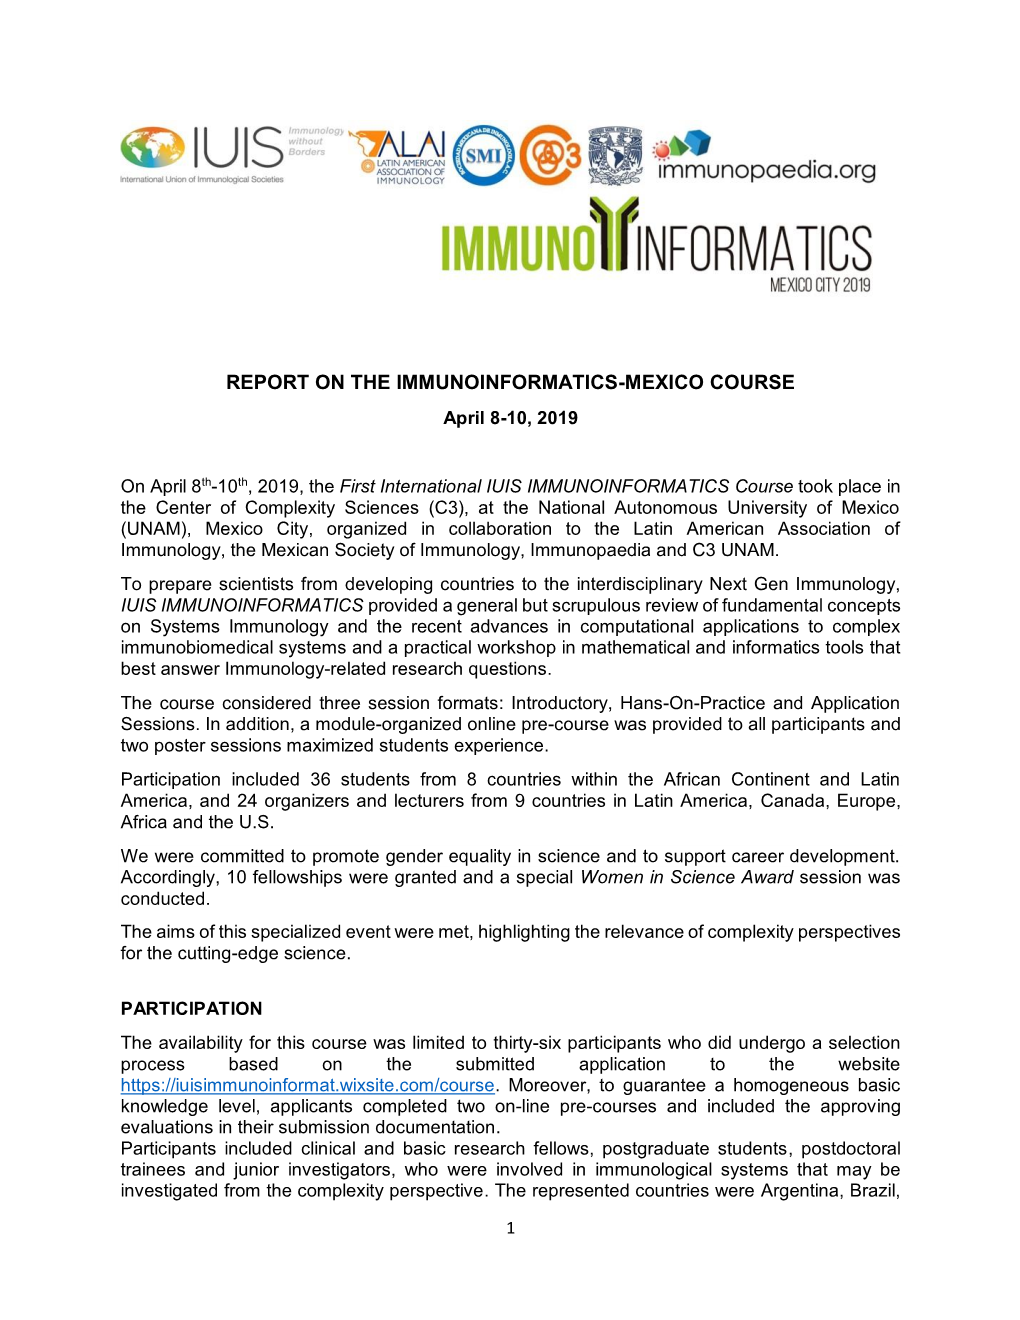 REPORT on the IMMUNOINFORMATICS-MEXICO COURSE April 8-10, 2019